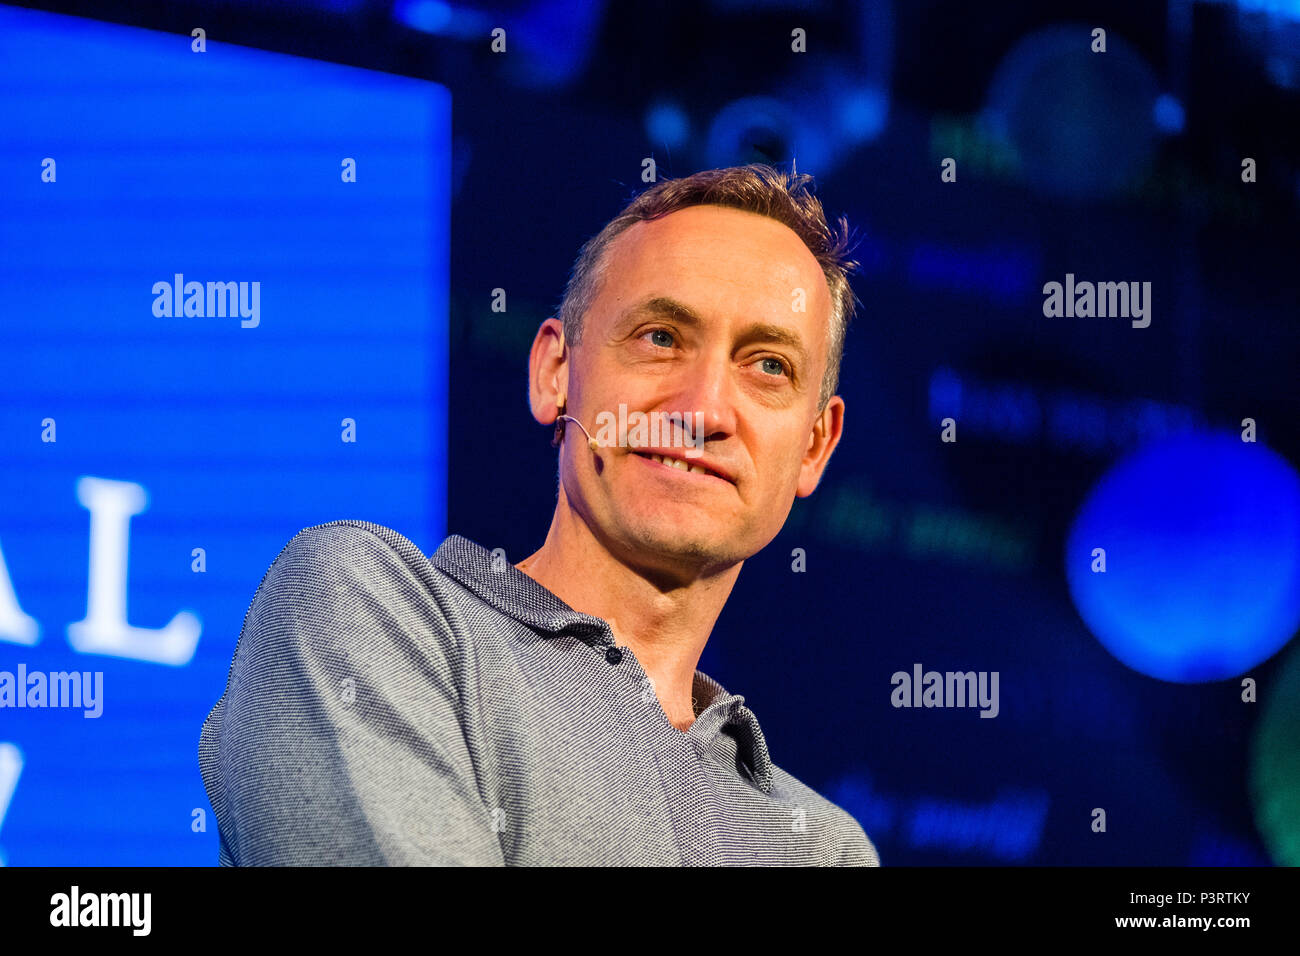 DAMIAN TAMBINI: Senior Lecturer at the London School of Economics and an Associate Fellow at the Institute for Public Policy Research, and at the Oxford Internet Institute, speaking at the 2018 Hay Festival of Literature and the Arts. Stock Photo